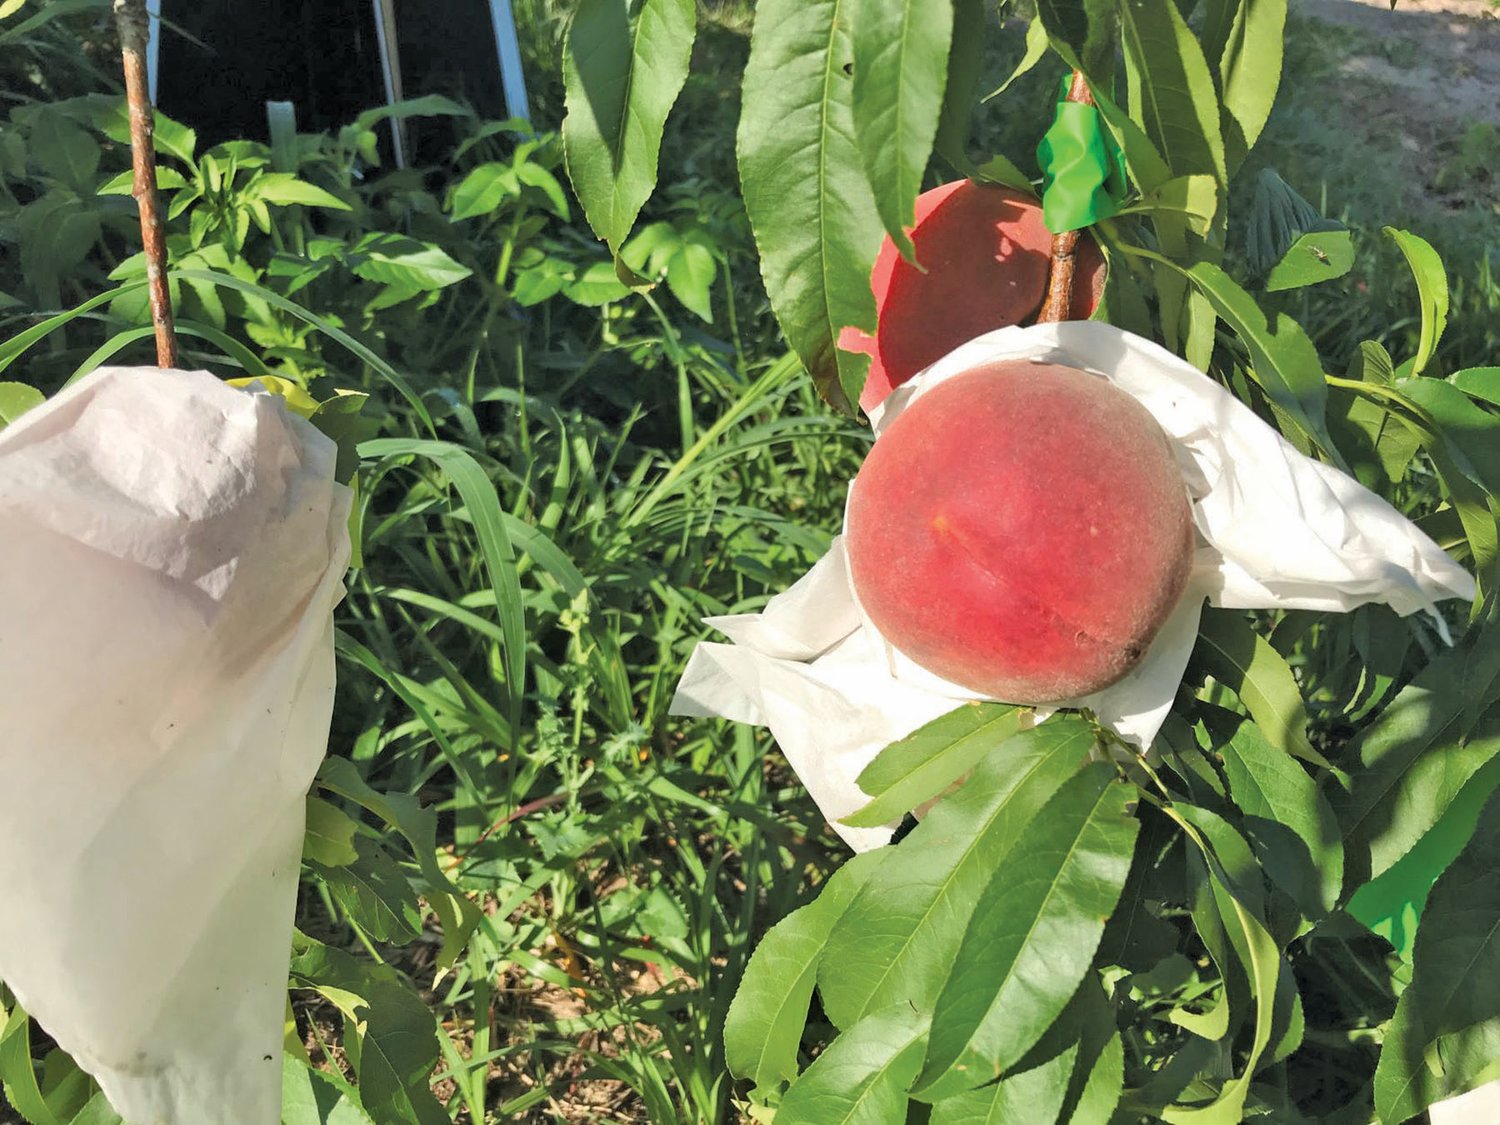 This picture shows a peach as well as a peach covered by a bag during a research experiment.